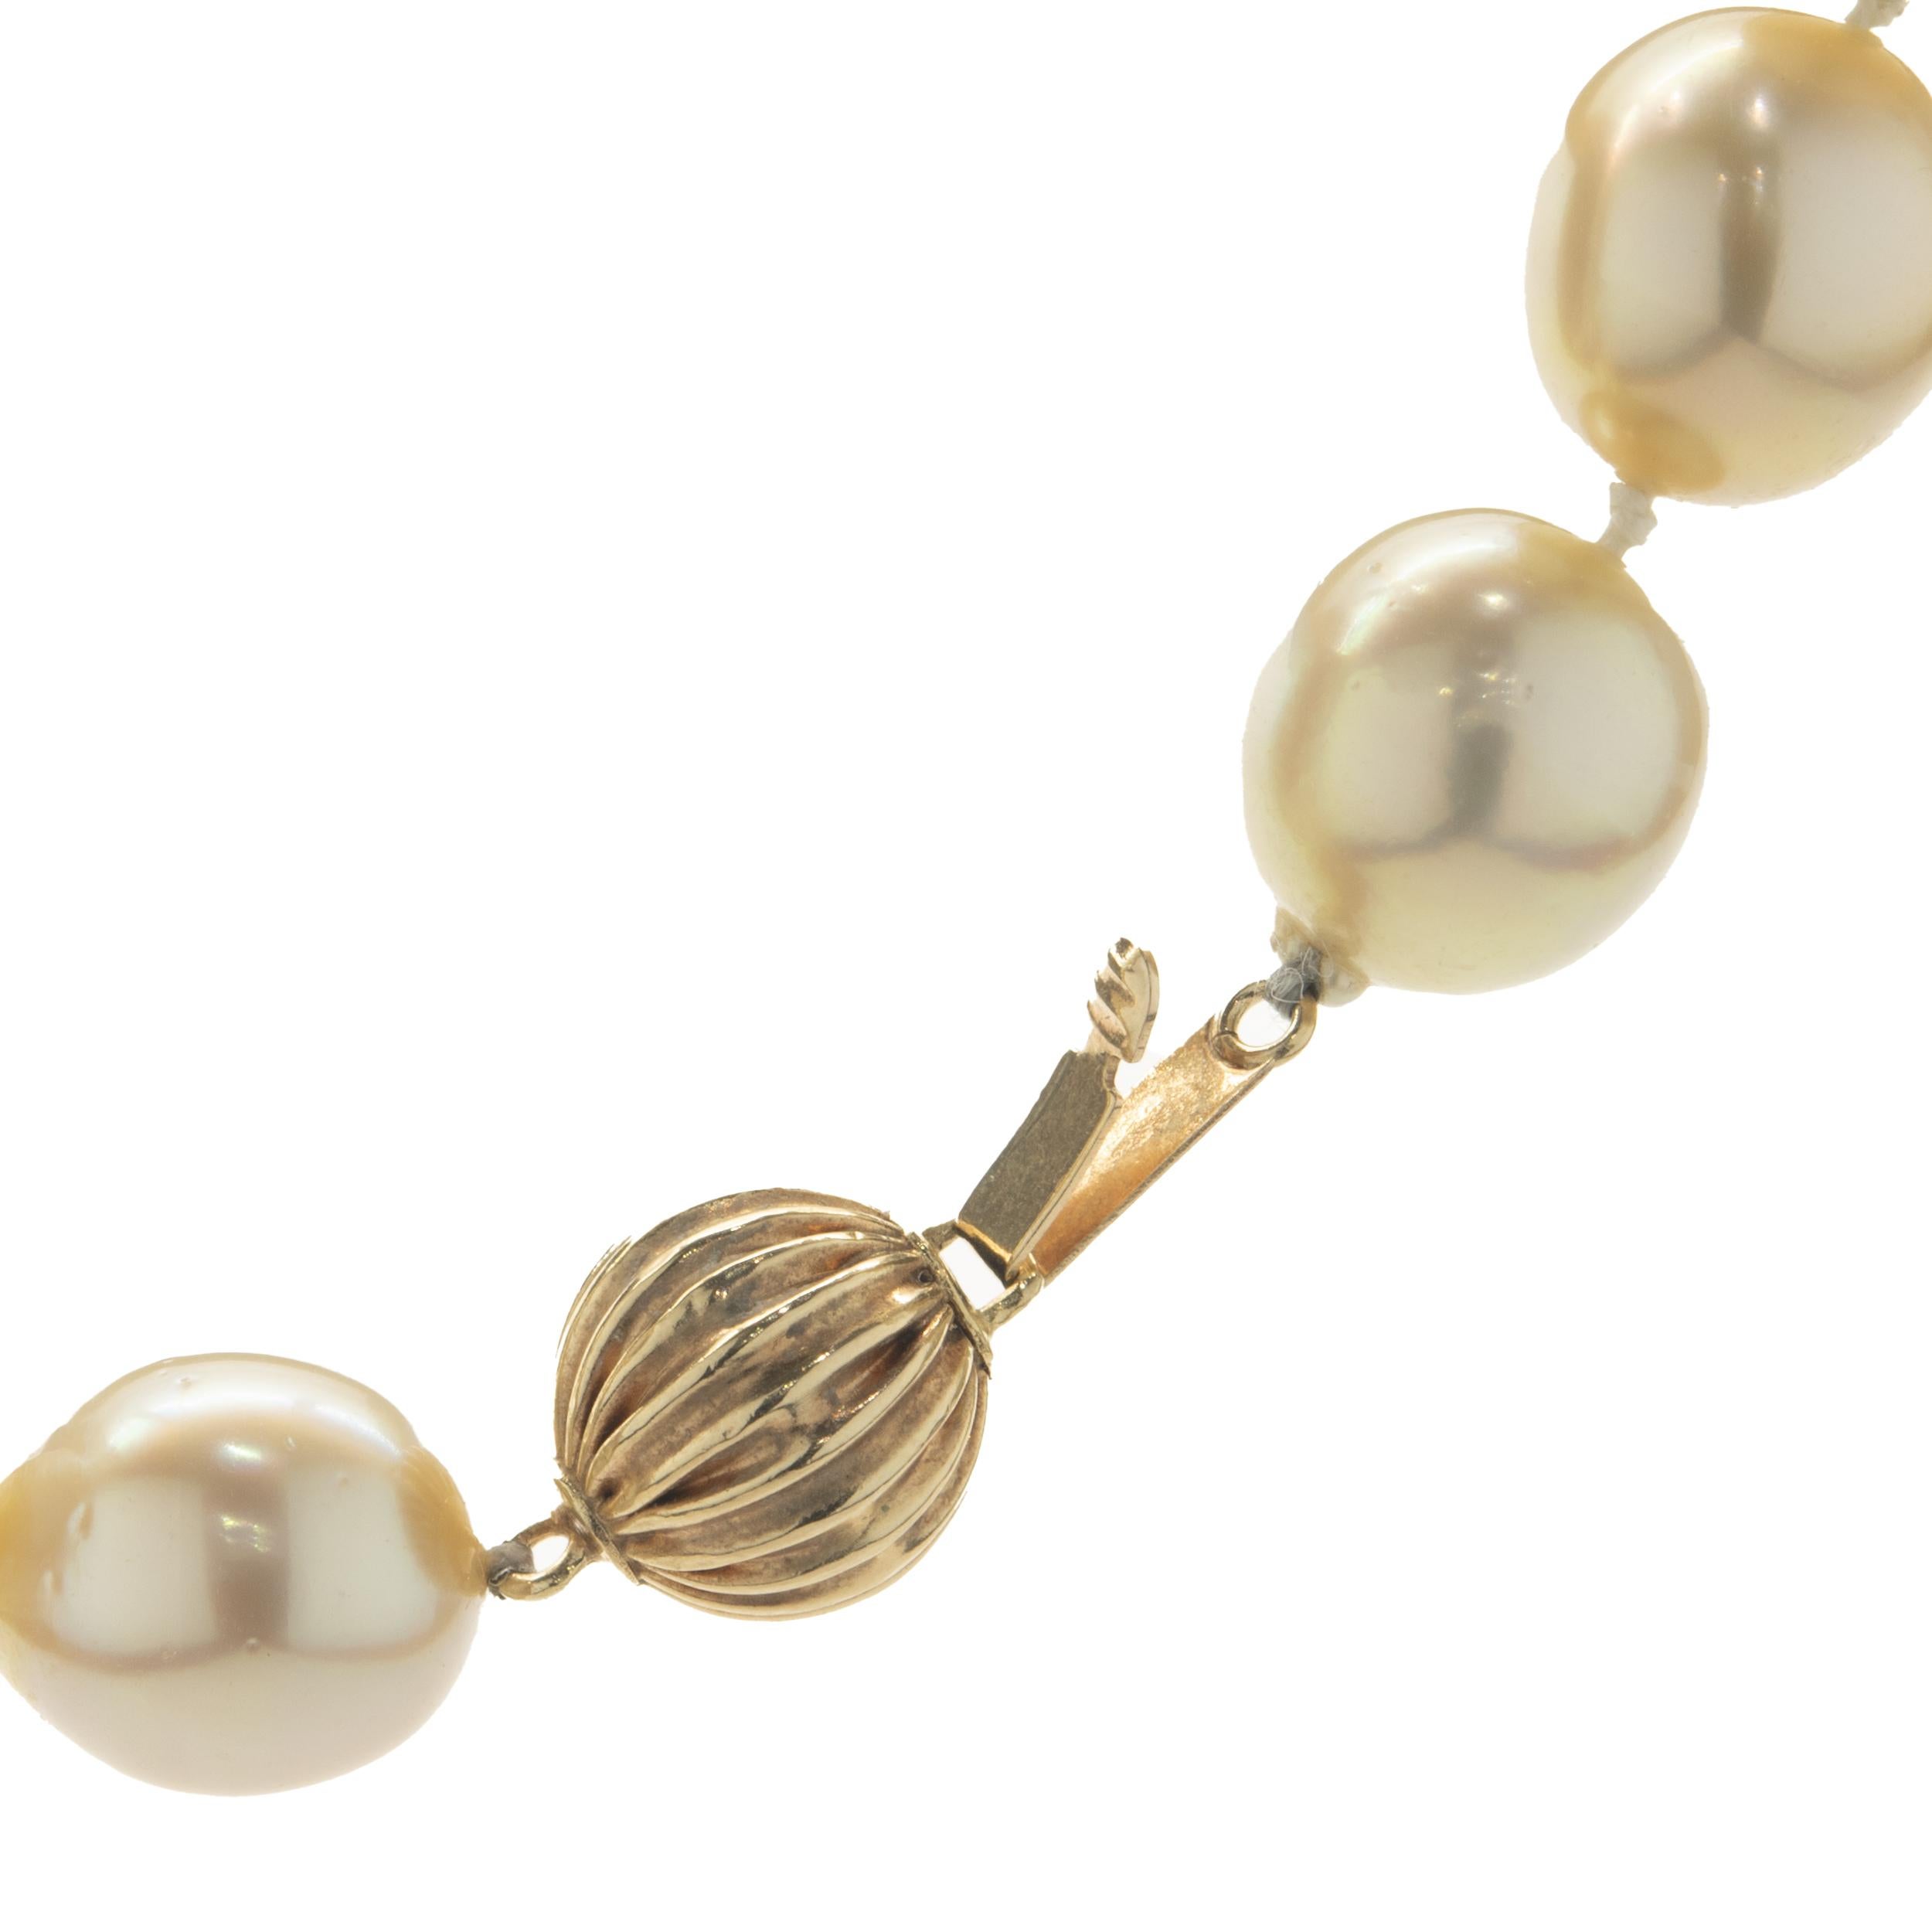 Golden Pearl Necklace with 14 Karat Yellow Gold Ball Clasp In Excellent Condition For Sale In Scottsdale, AZ